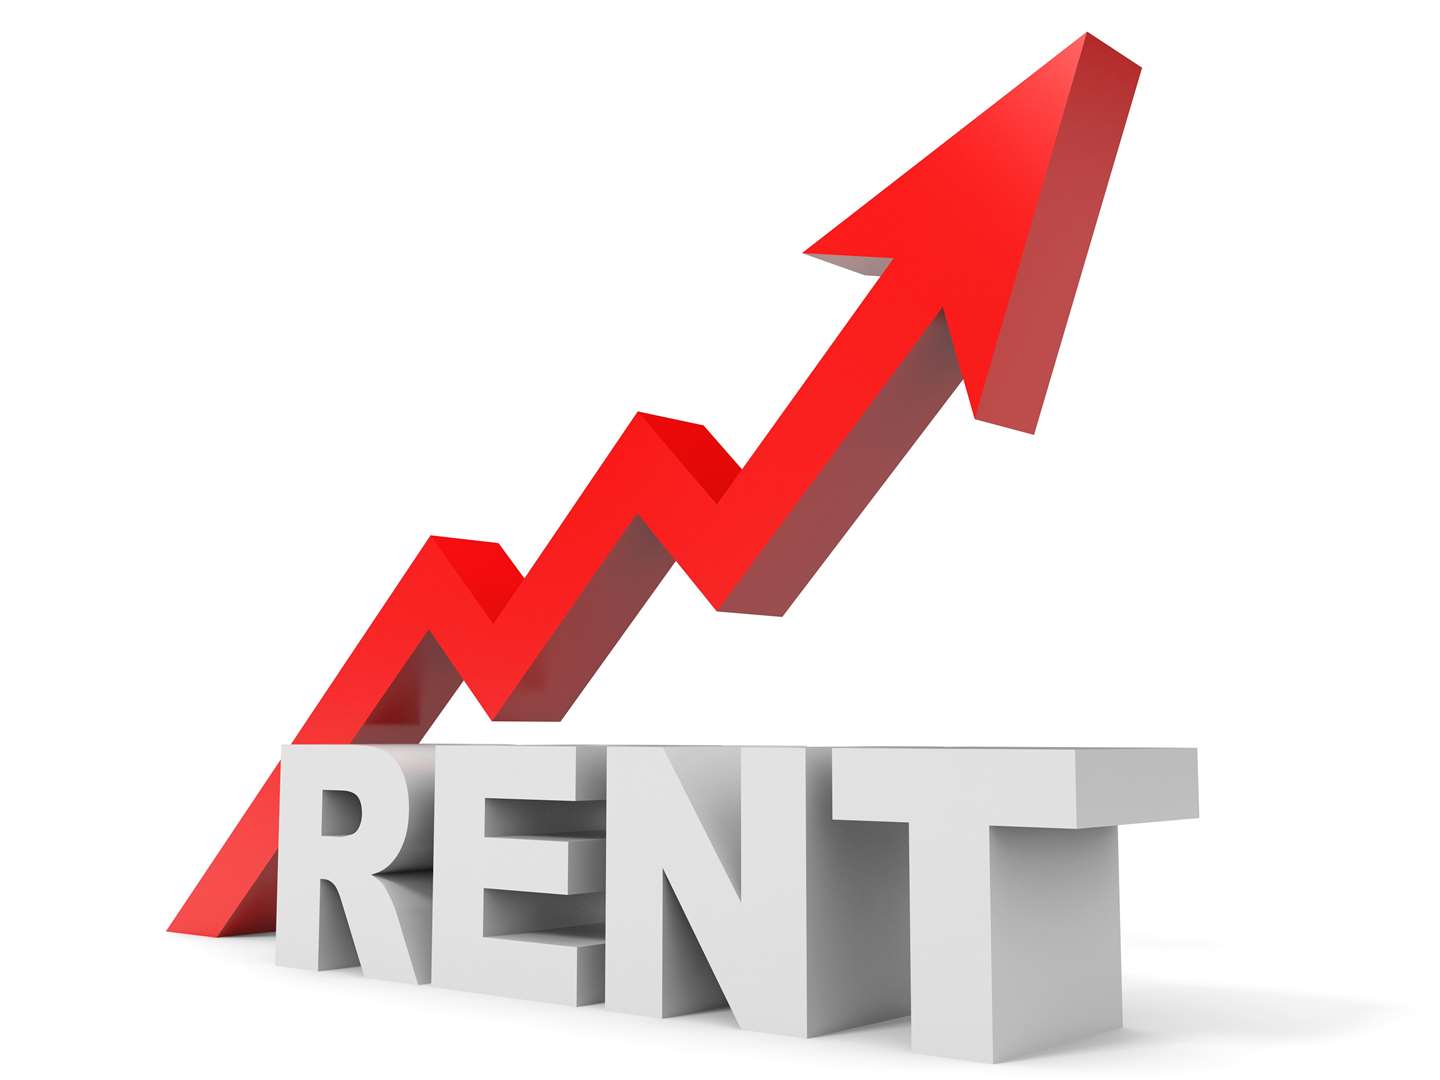 Council house rents are on the rise.